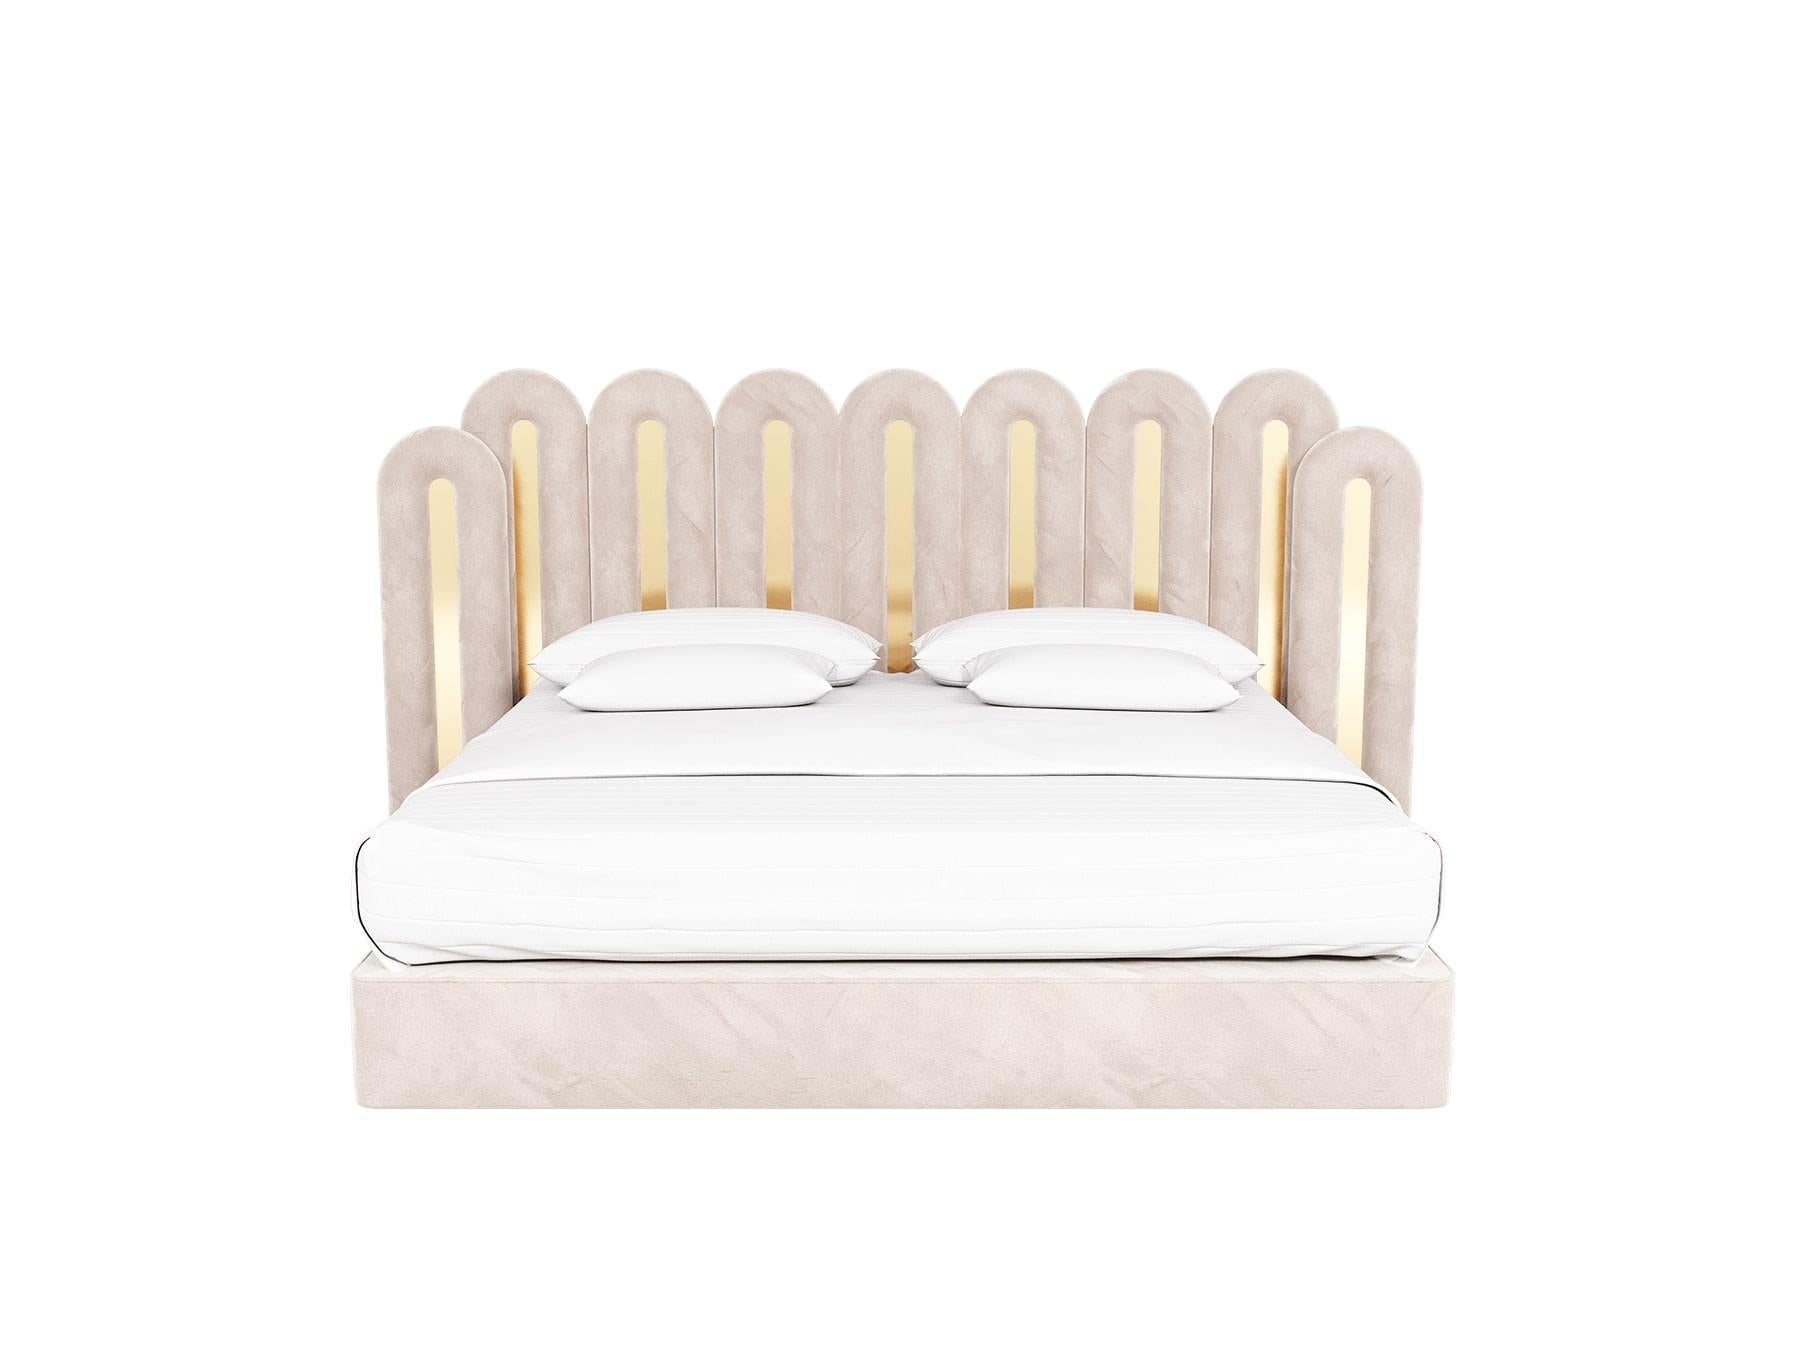 Demiz Bed is a modern vibe statement piece. It's the perfect modern bed, upholstered in velvet, to be used on a high-end boutique hotel project or a private luxury bedroom full of personality and charisma.

Materials: Interior Structure in Wood;